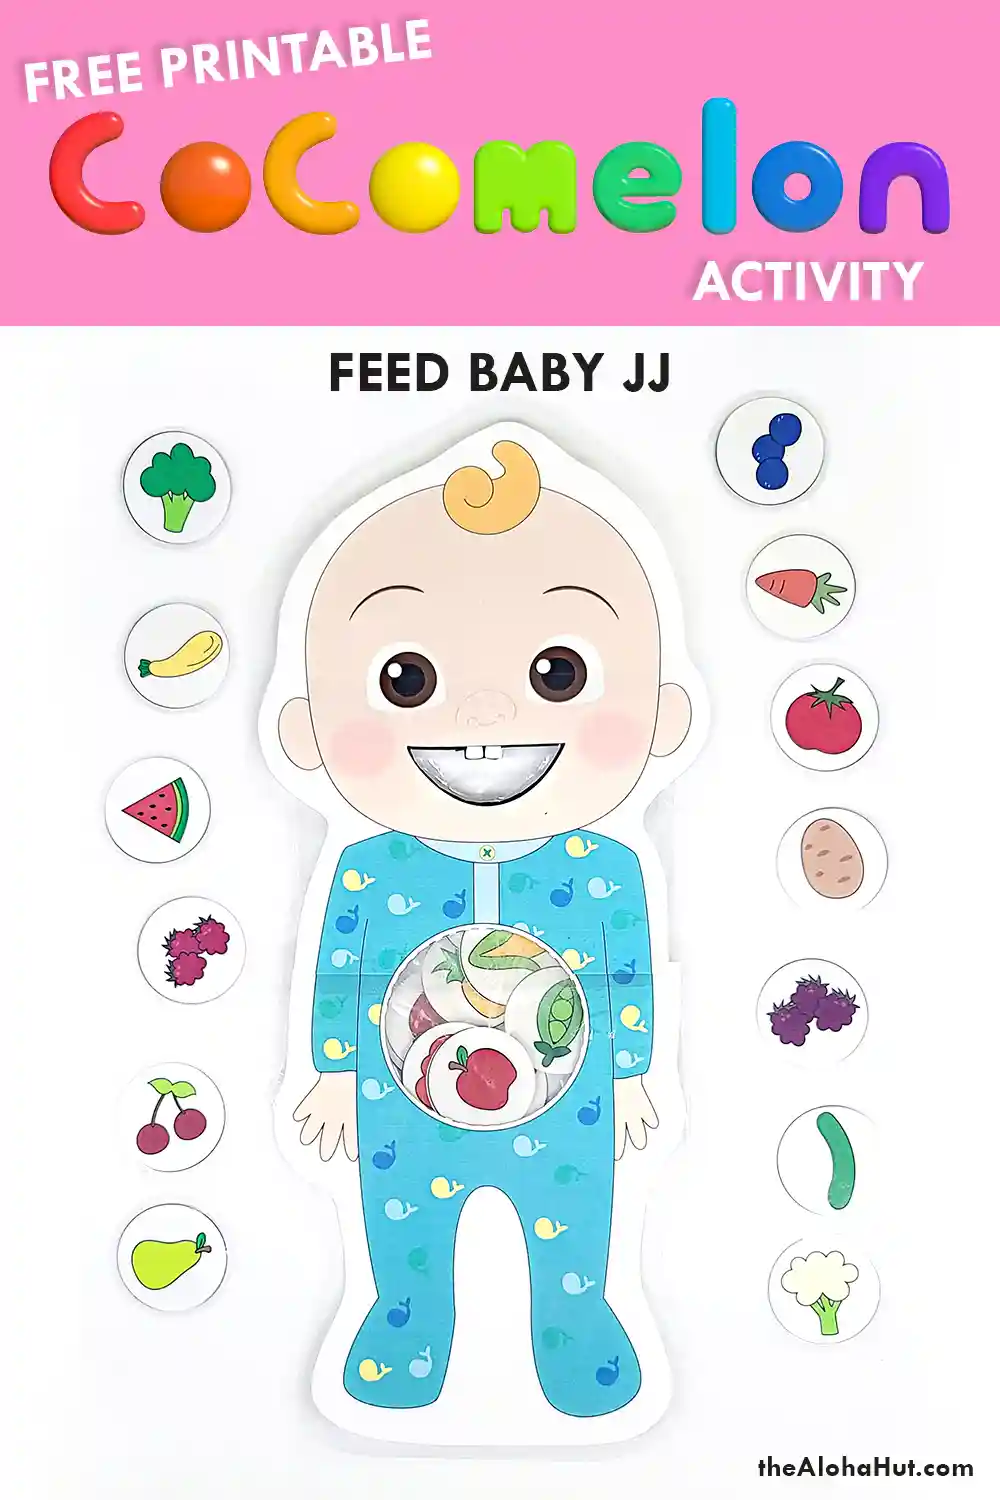 Cocomelon Feed Baby JJ Activity - fruits & veggies - toddler activity - free printable